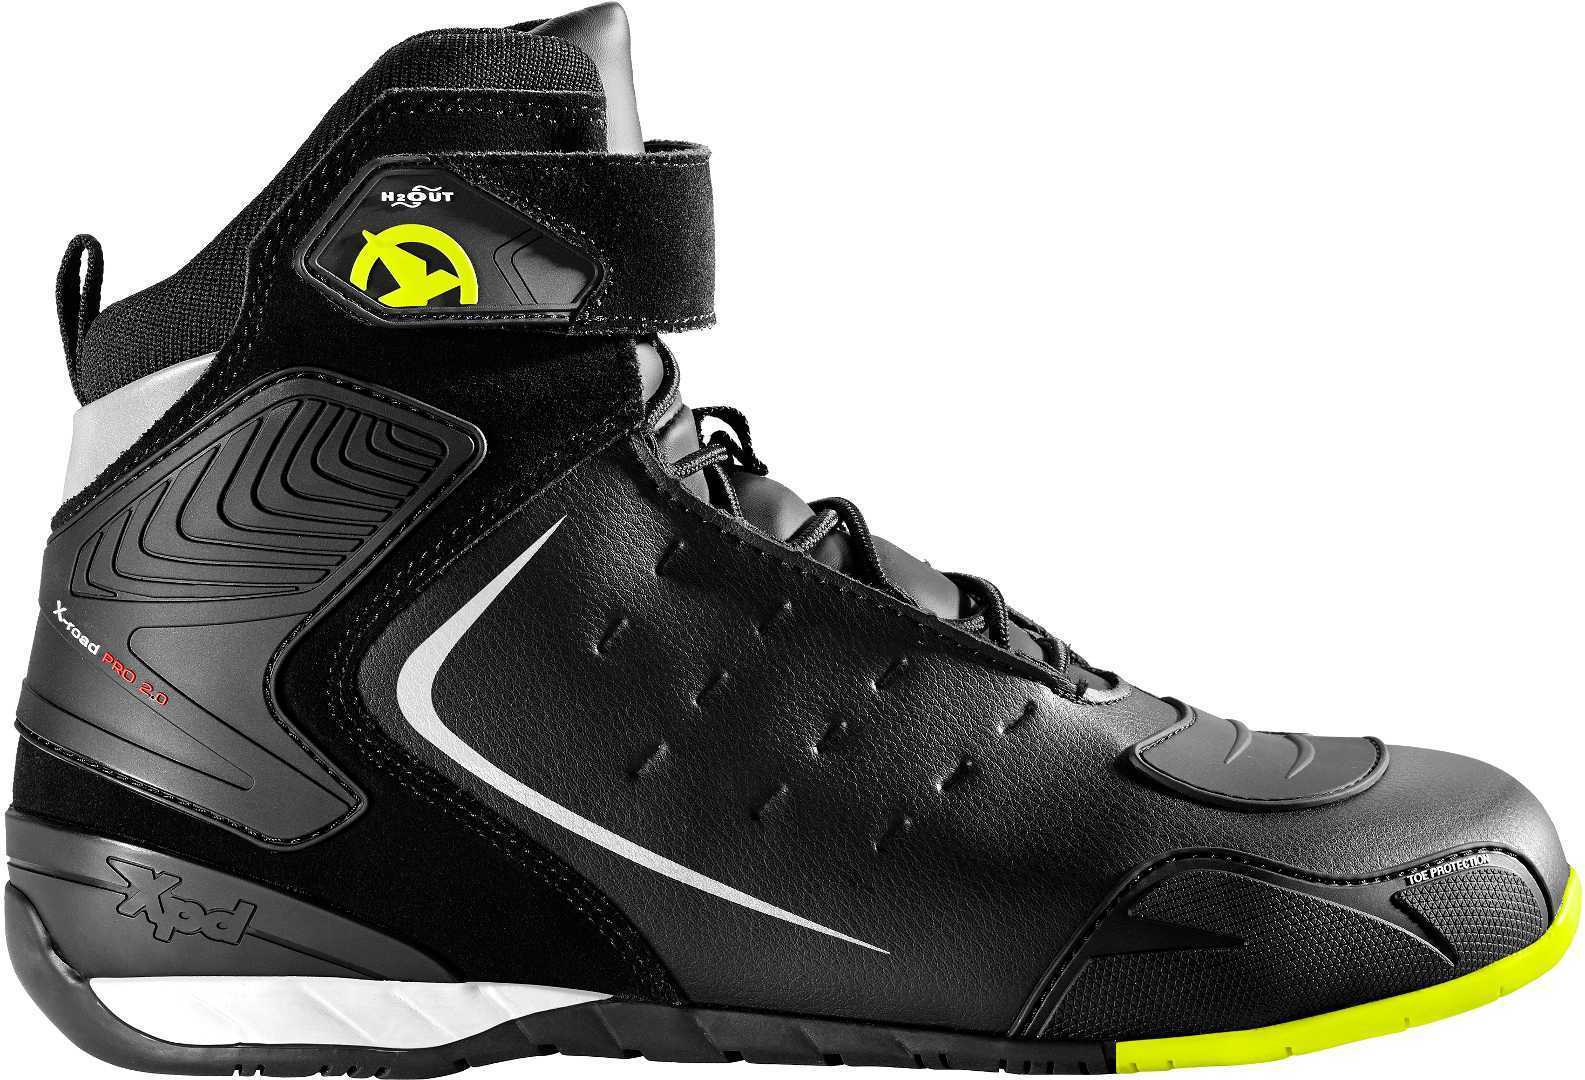 Image of EU XPD X-Road H2Out Jaune Fluo Chaussures Taille 41